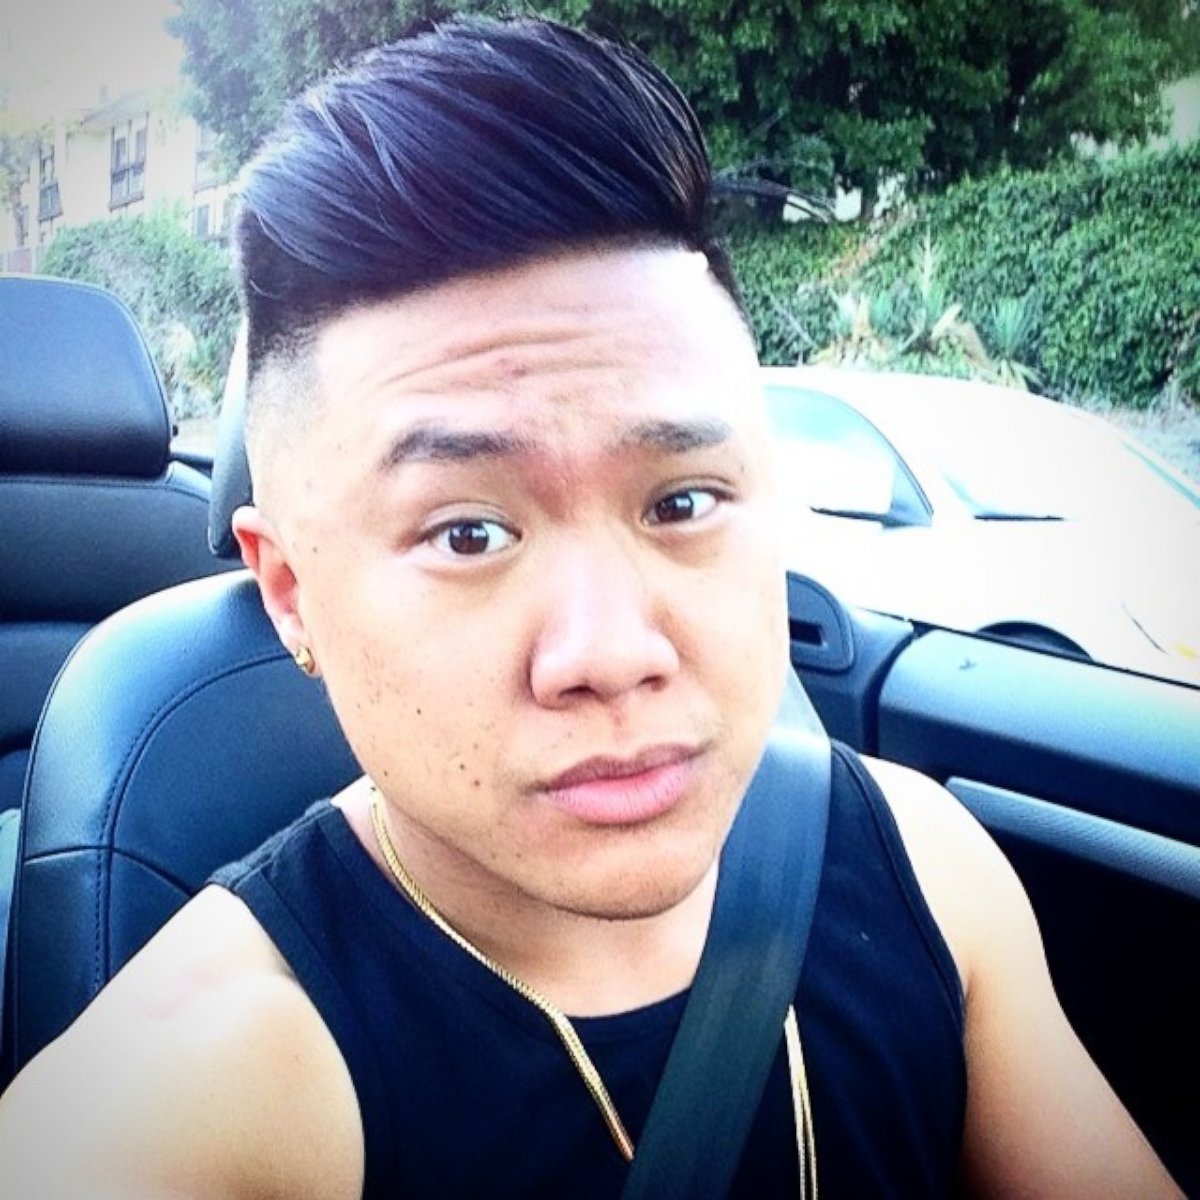 Tim Delaghetto posted this photo to Instagram on July 25, 2014 with the caption, "Originally sent this to @chia_habte askin her how she liked my hurrrcut. She liked it. Thanks @thecooljoey for the fresh cut!!!"